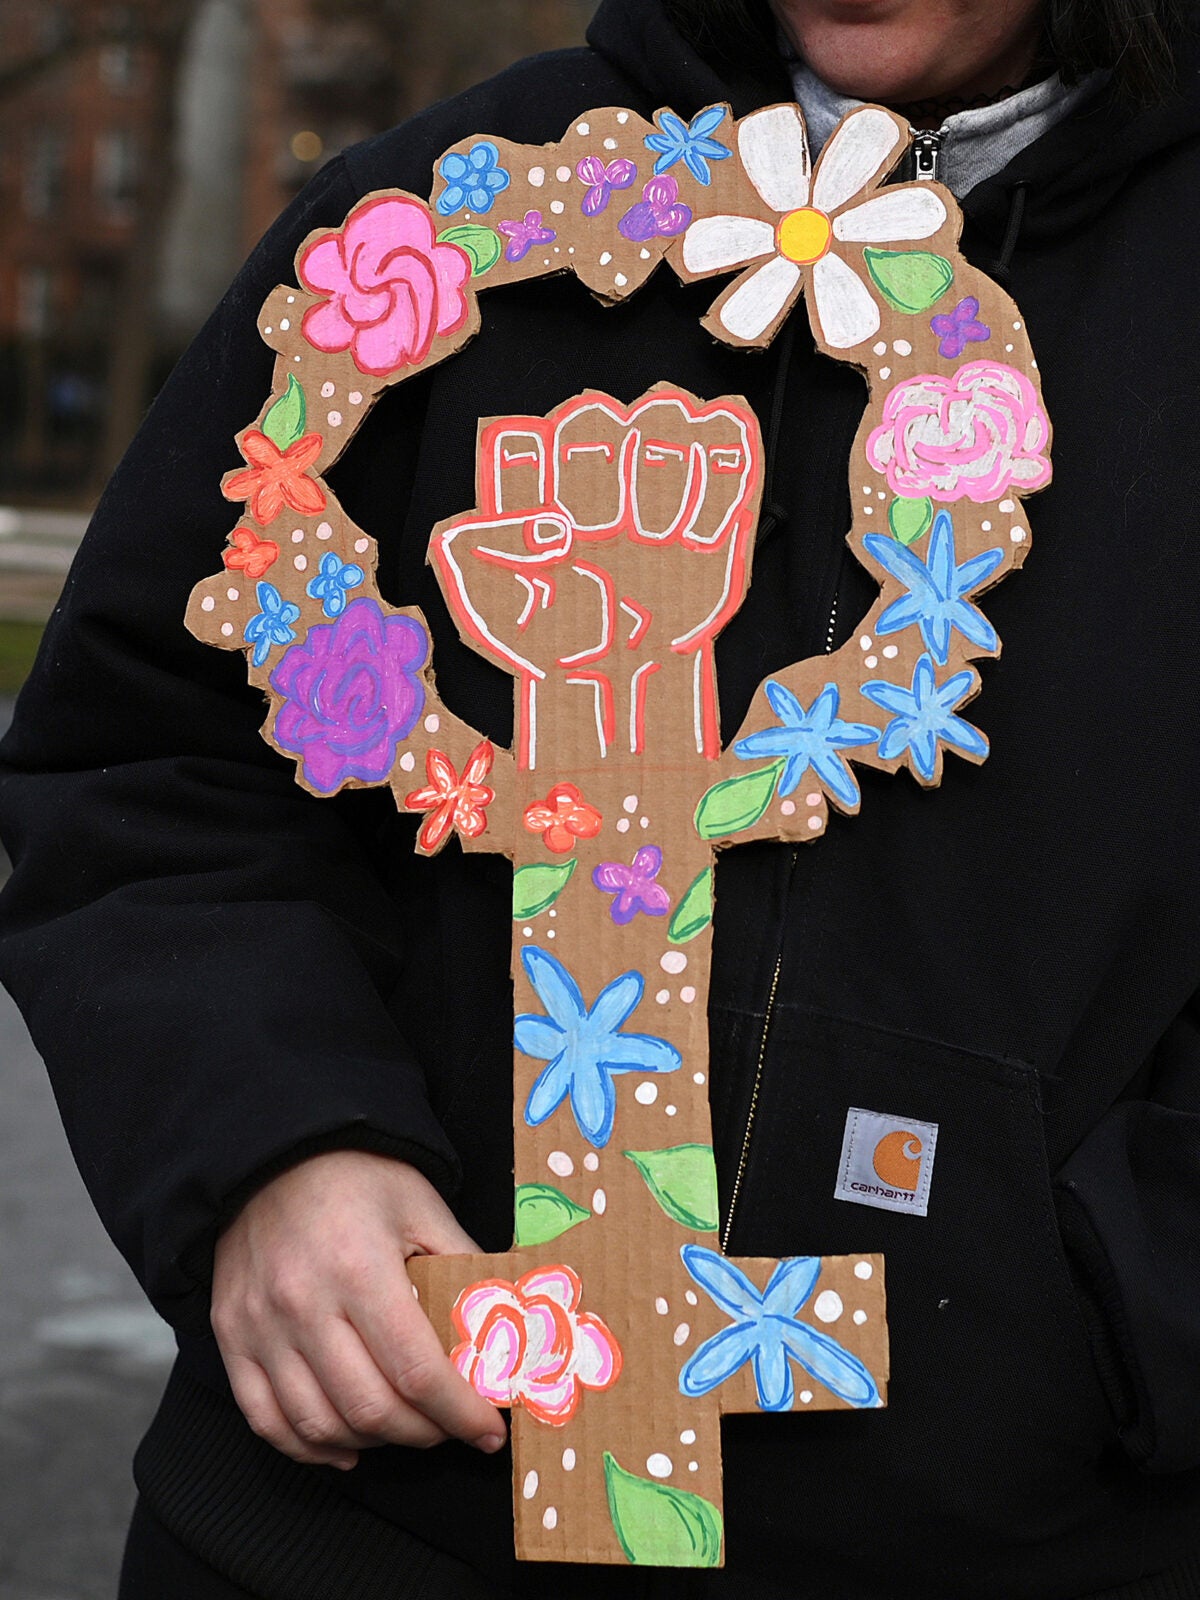 A female wearing a black winter jacket holds a cardboard sign in the shape of the female symbol that is decorated with colorful, hand-drawn flowers and a fist raised in the middle.